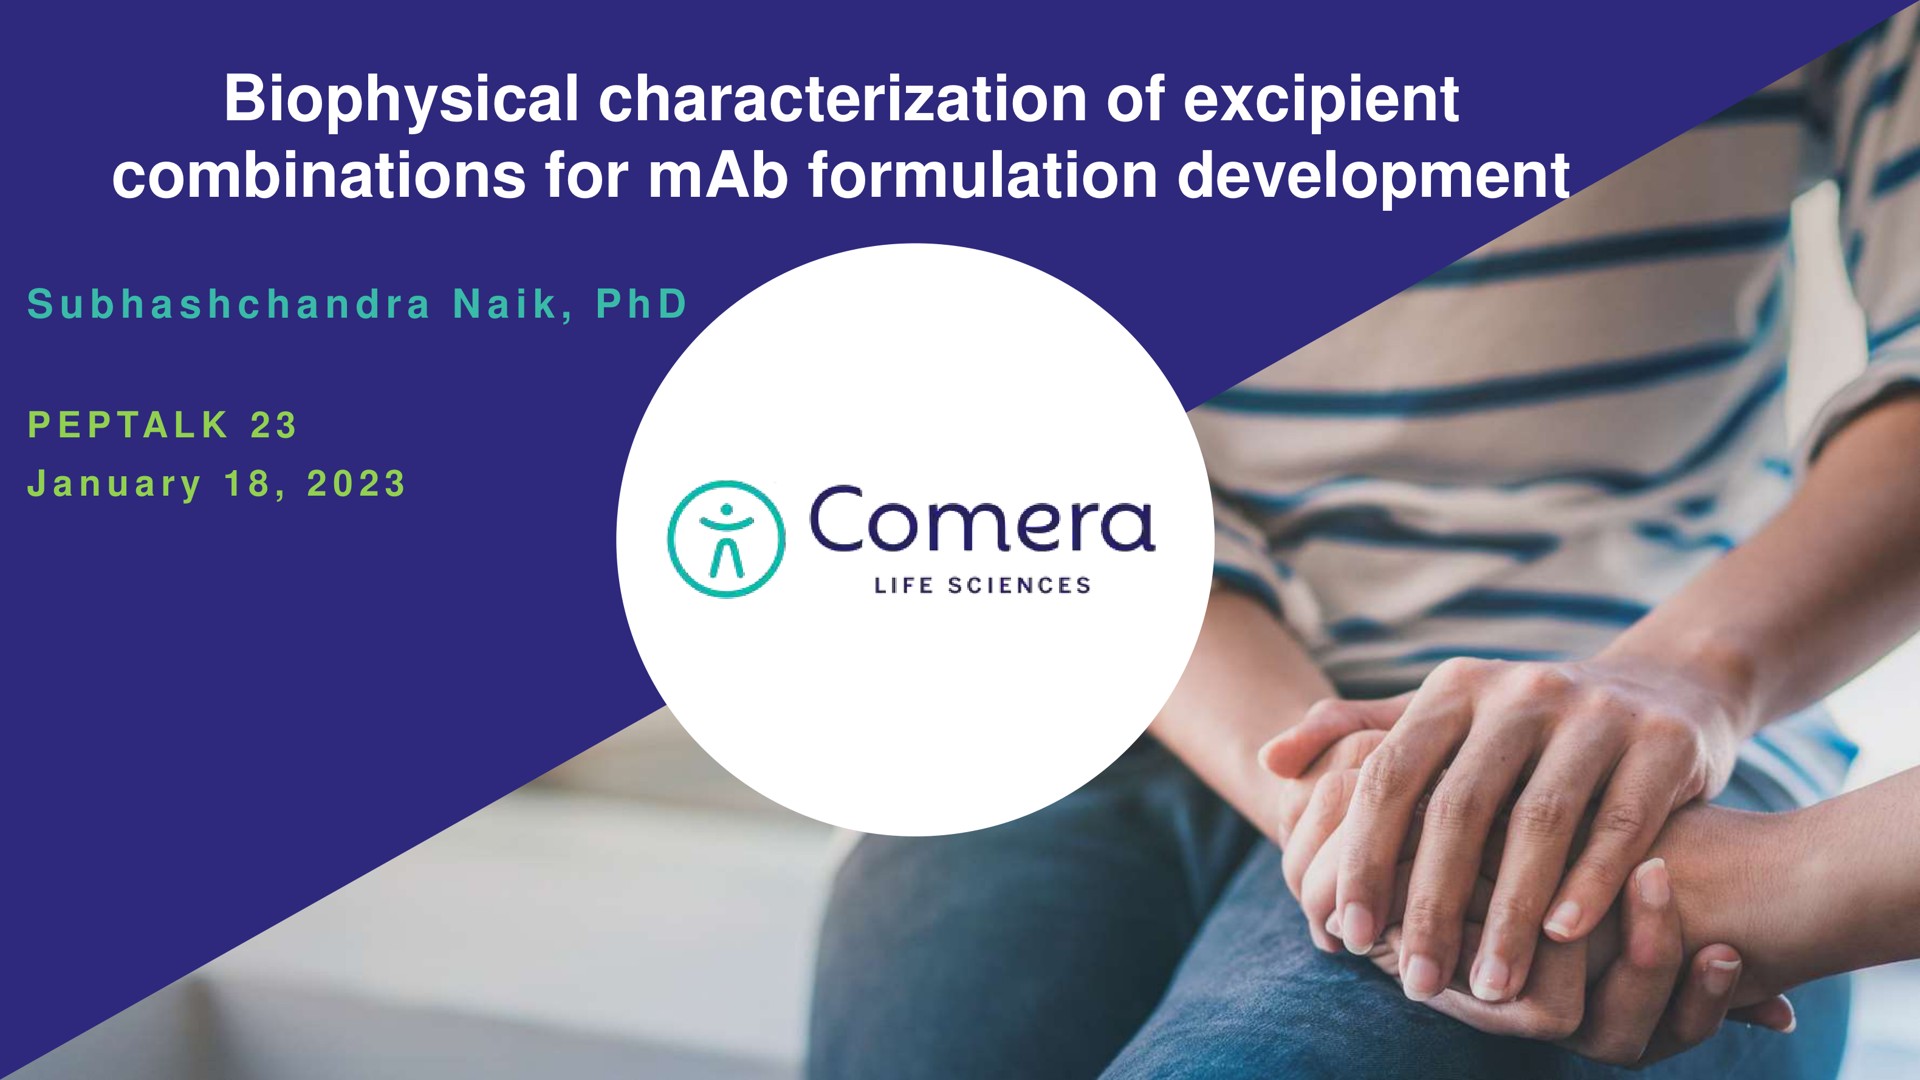 biophysical characterization of excipient combinations for formulation development | Comera